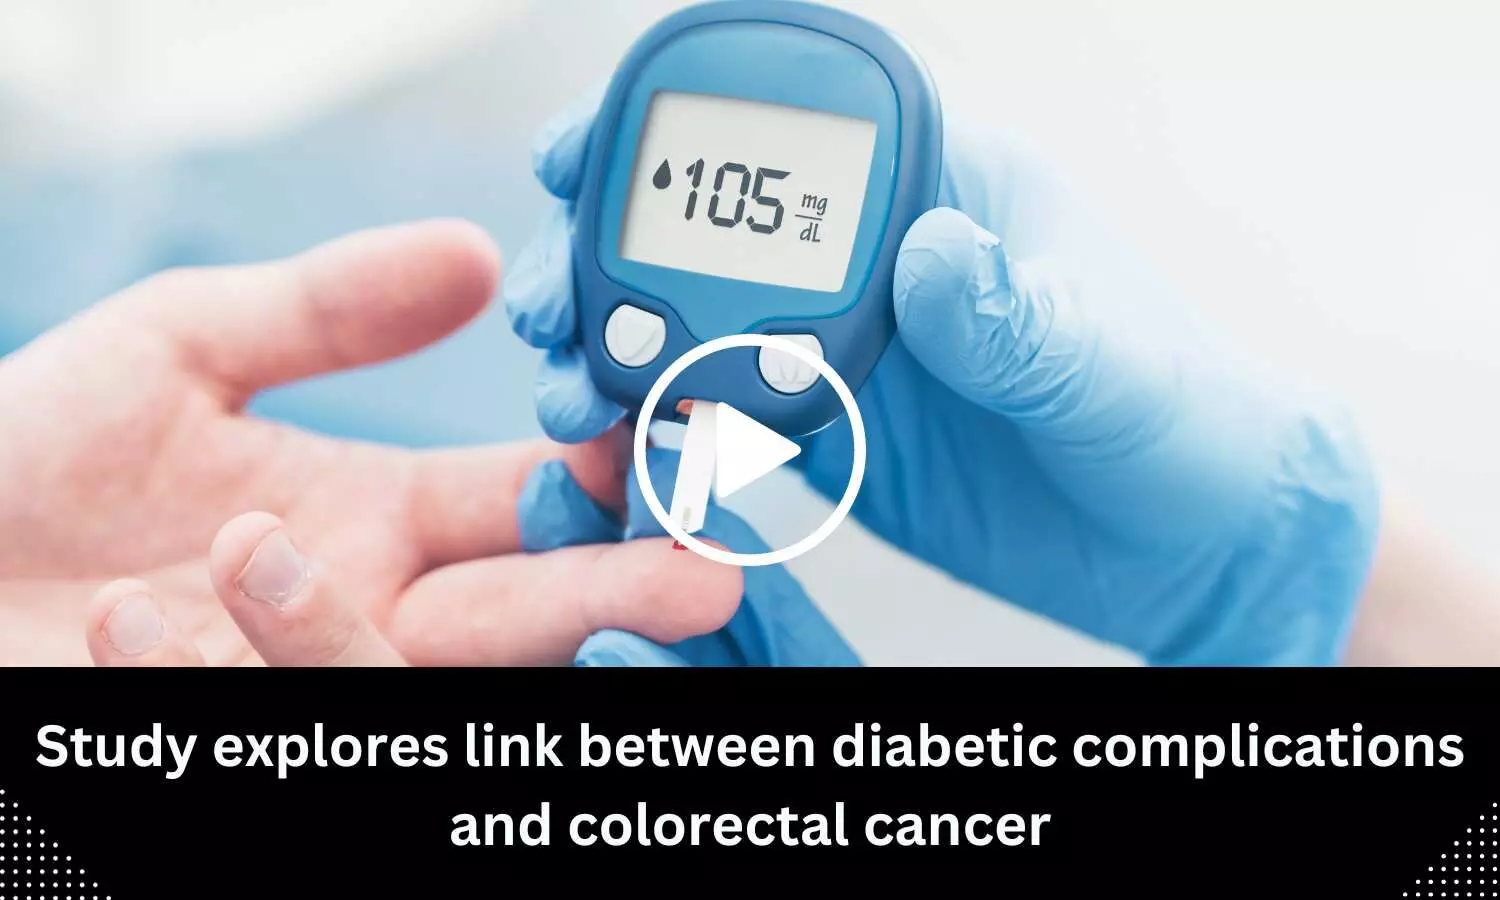 Study explores link between diabetic complications and colorectal cancer